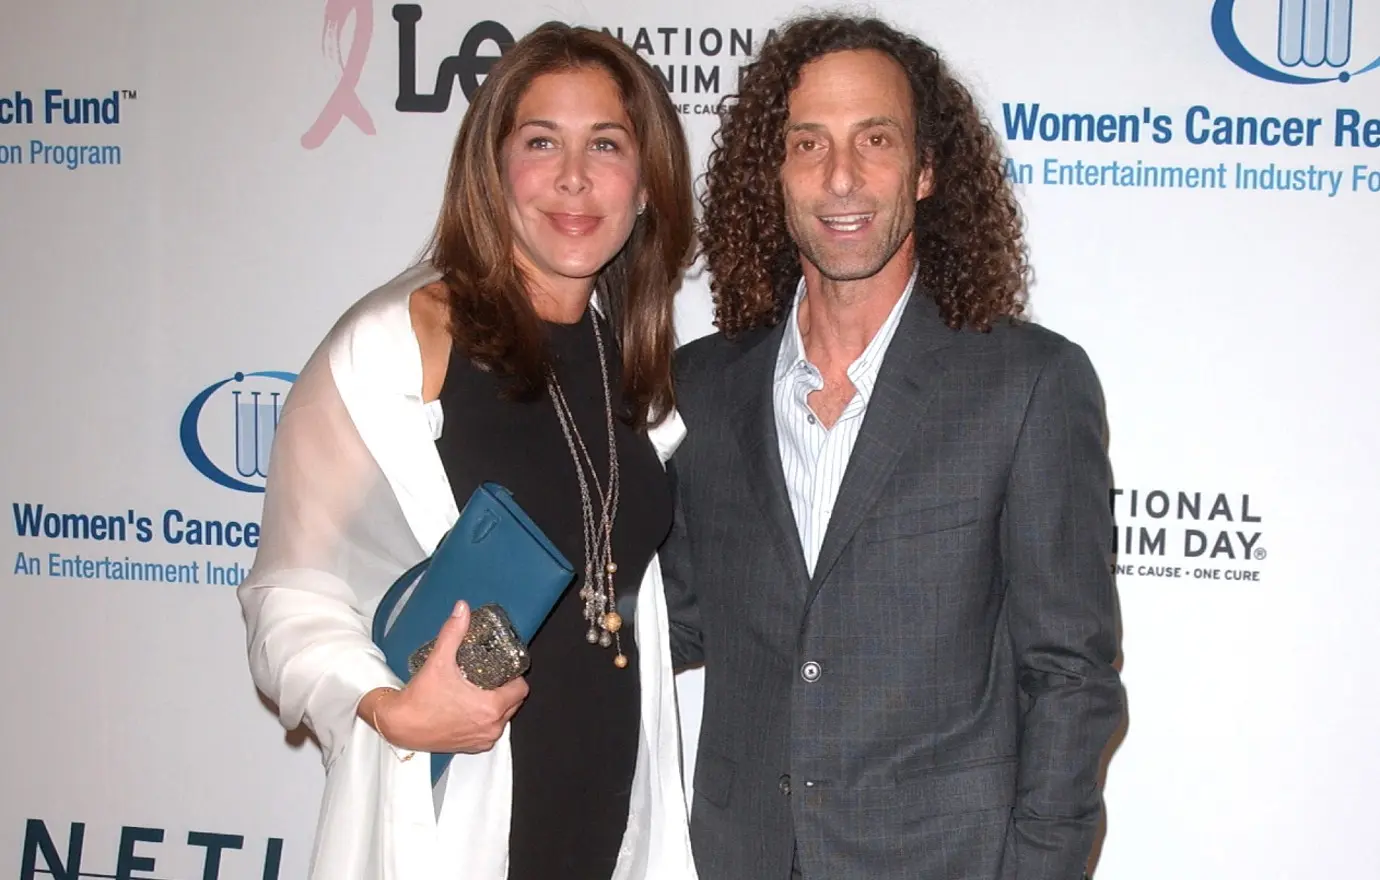 Kenny G with Lyndie Benson